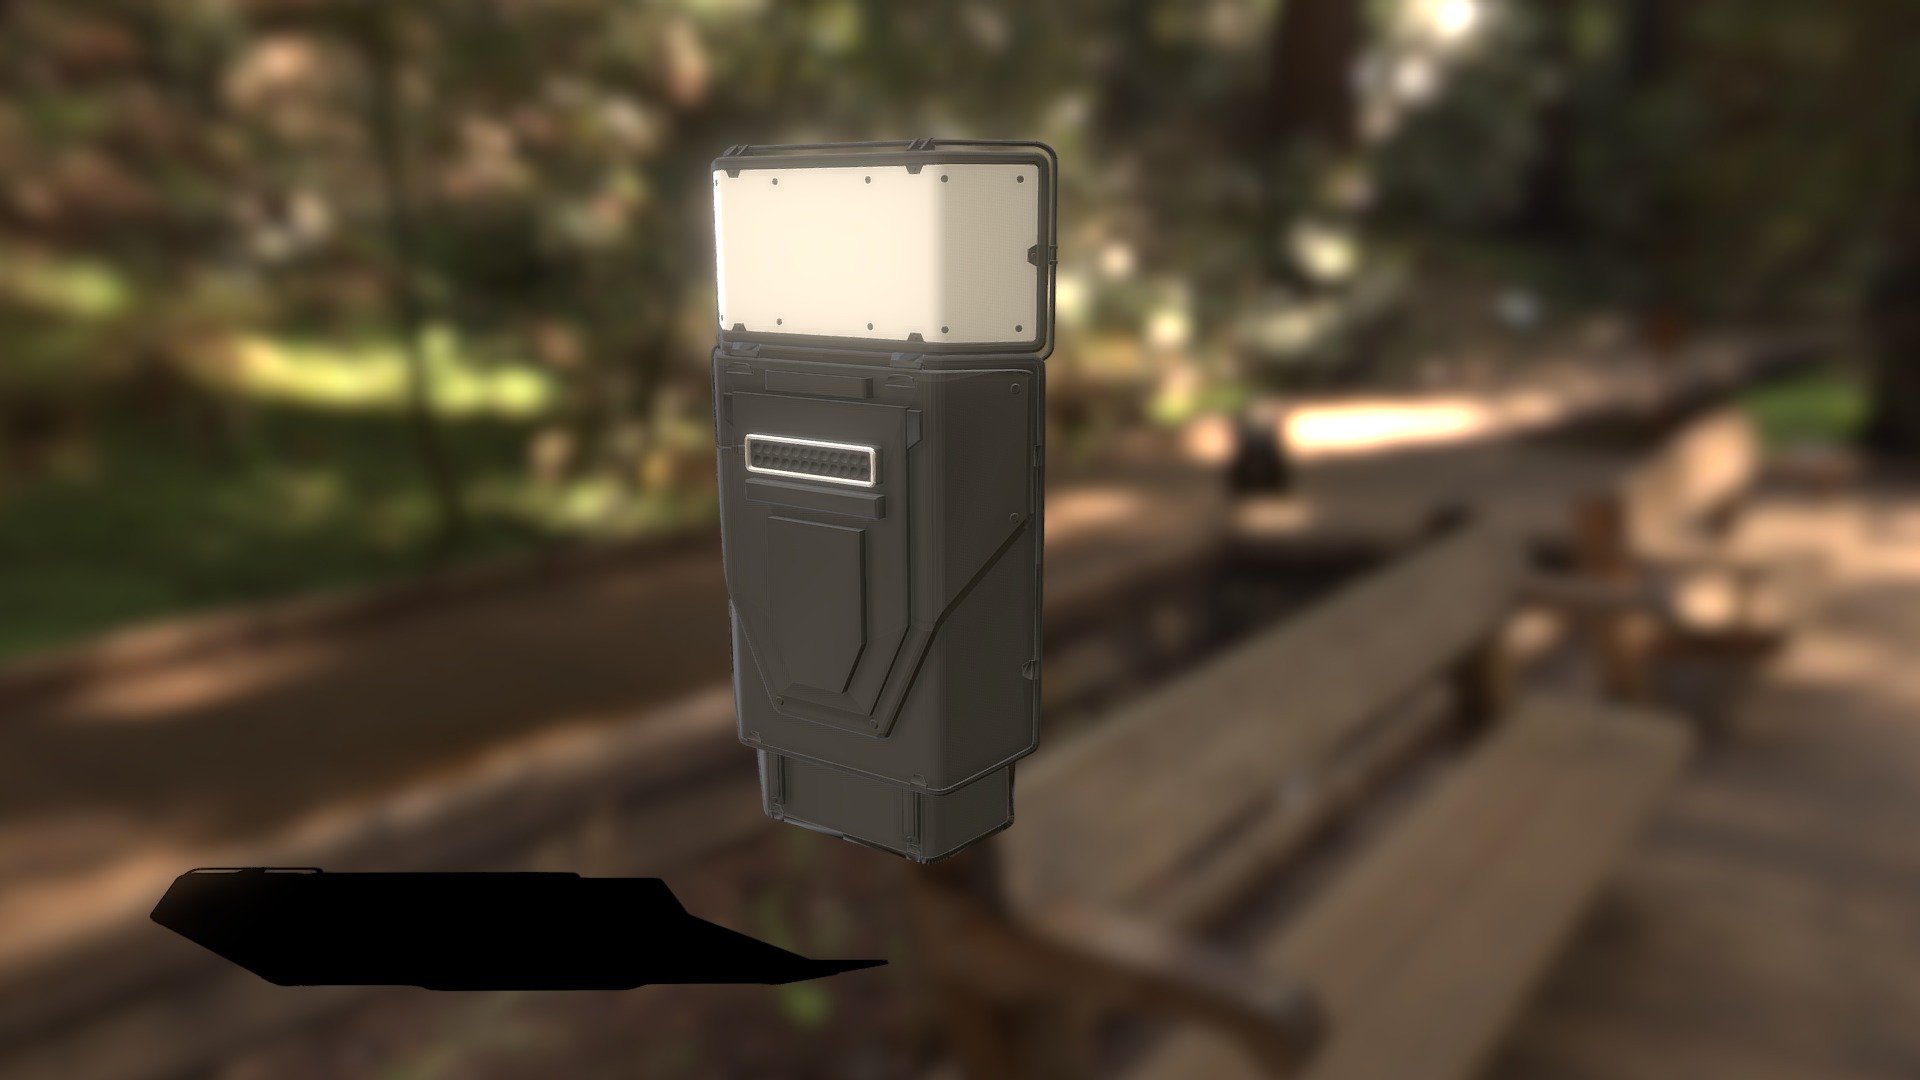 Low Poly 3D model of a riot shield.
The glass is transparent 3d model